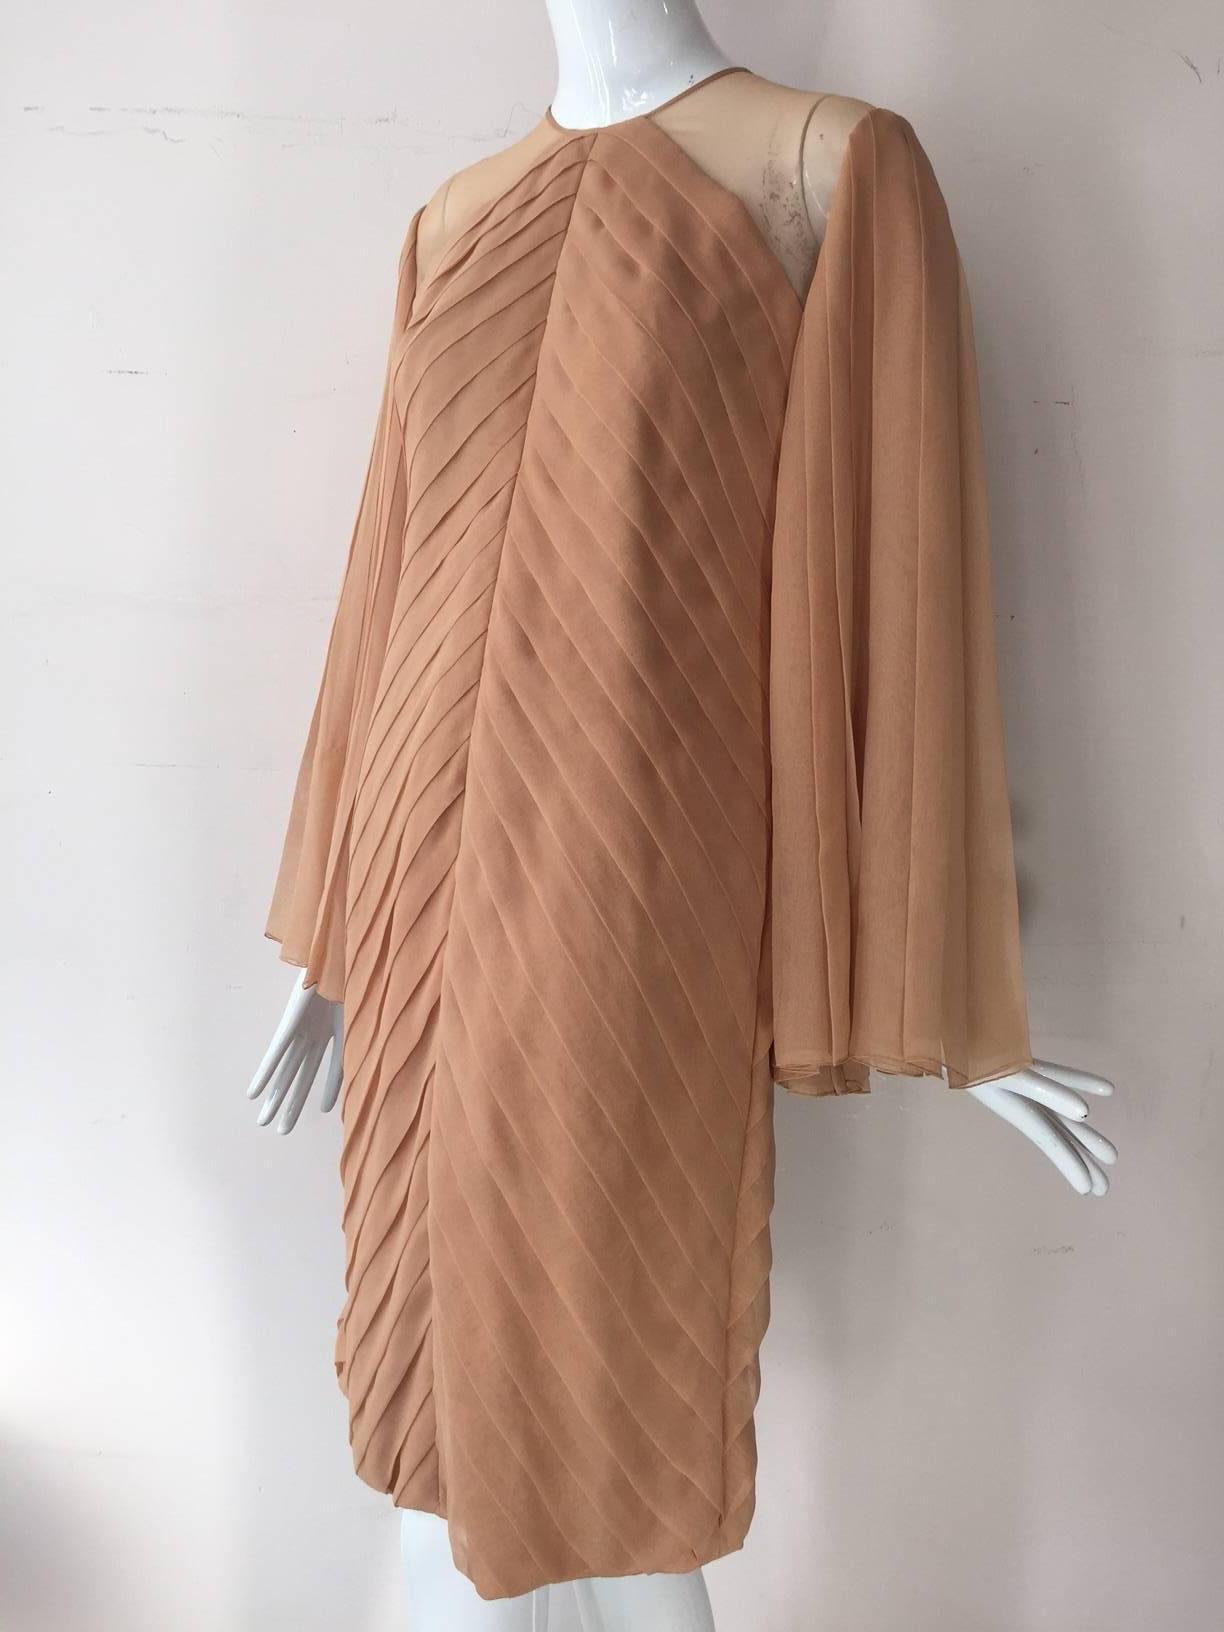 1980s James Galanos peach blush silk chiffon pleated cocktail dress with heavily pleated fan-sleeves.  Hand rolled hem on sleeves. Body constructed with 4 layers of silk chiffon. Completely lined. Original hem.  Back gold-tone buttons. 